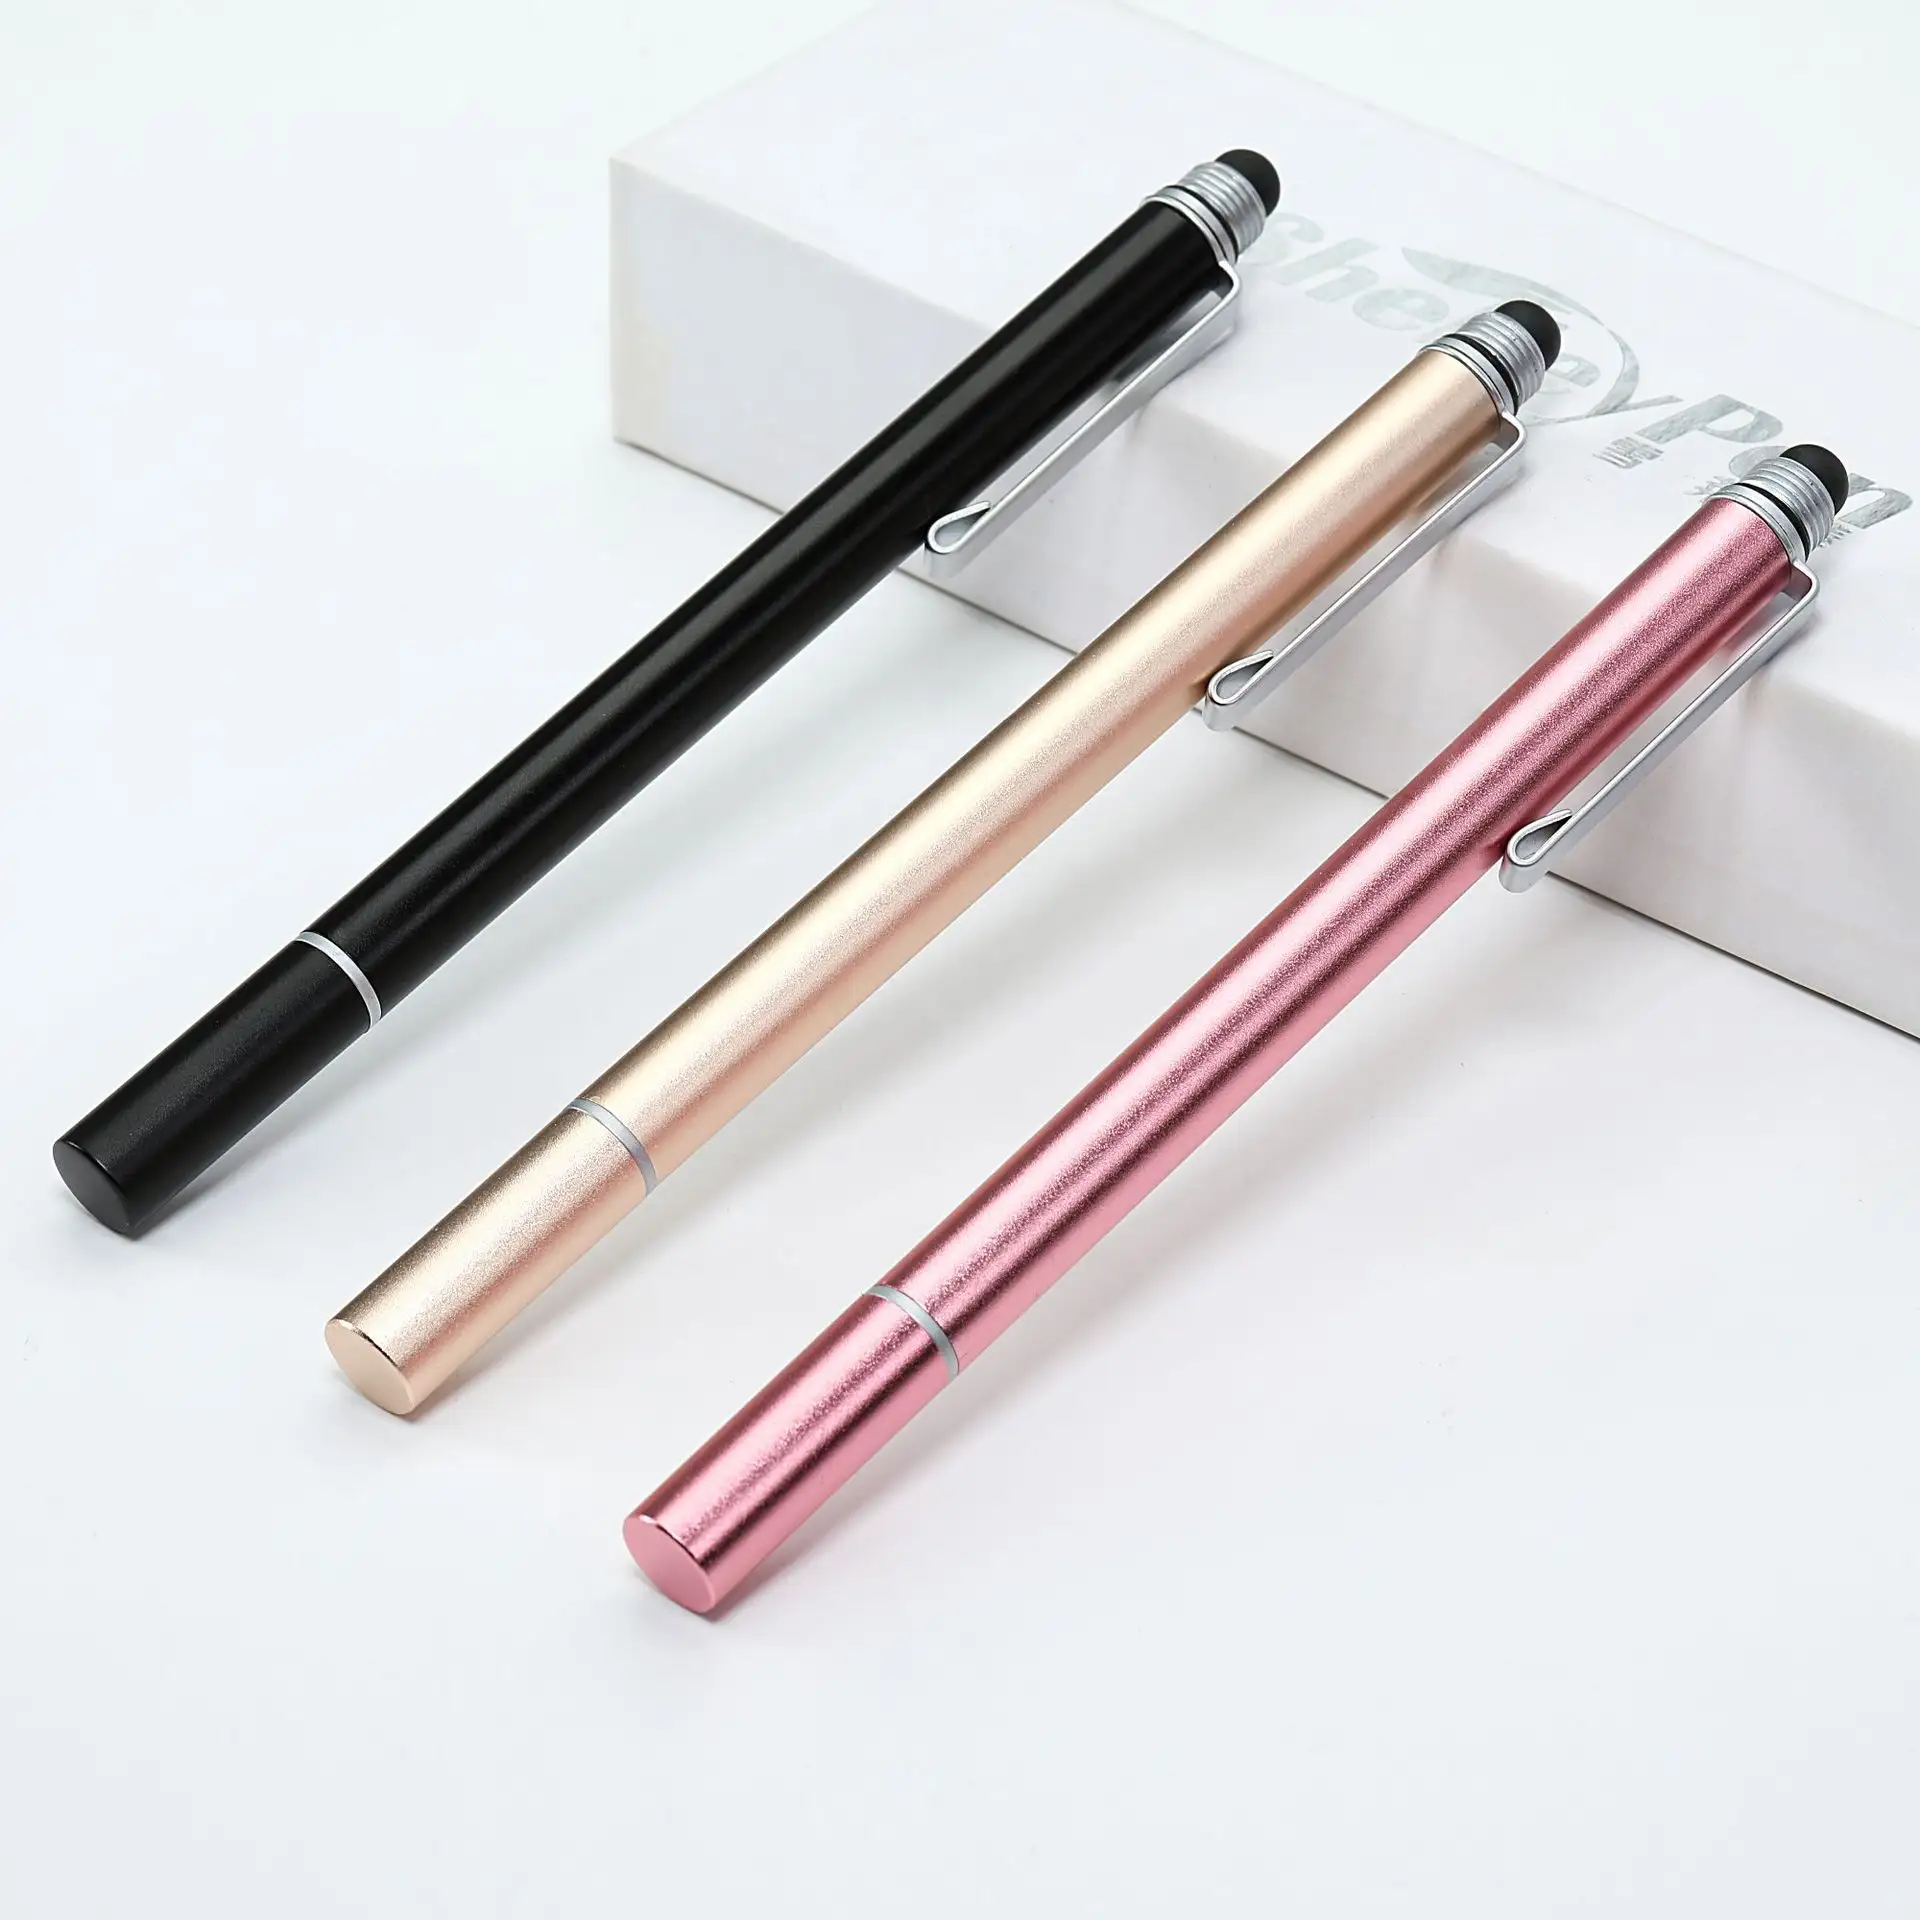 Metal Tablet Pen With Pen Clip Stylus Pen Touch Screen For Tablet PC for iPhone iPad Capacitive Stylus Pencil